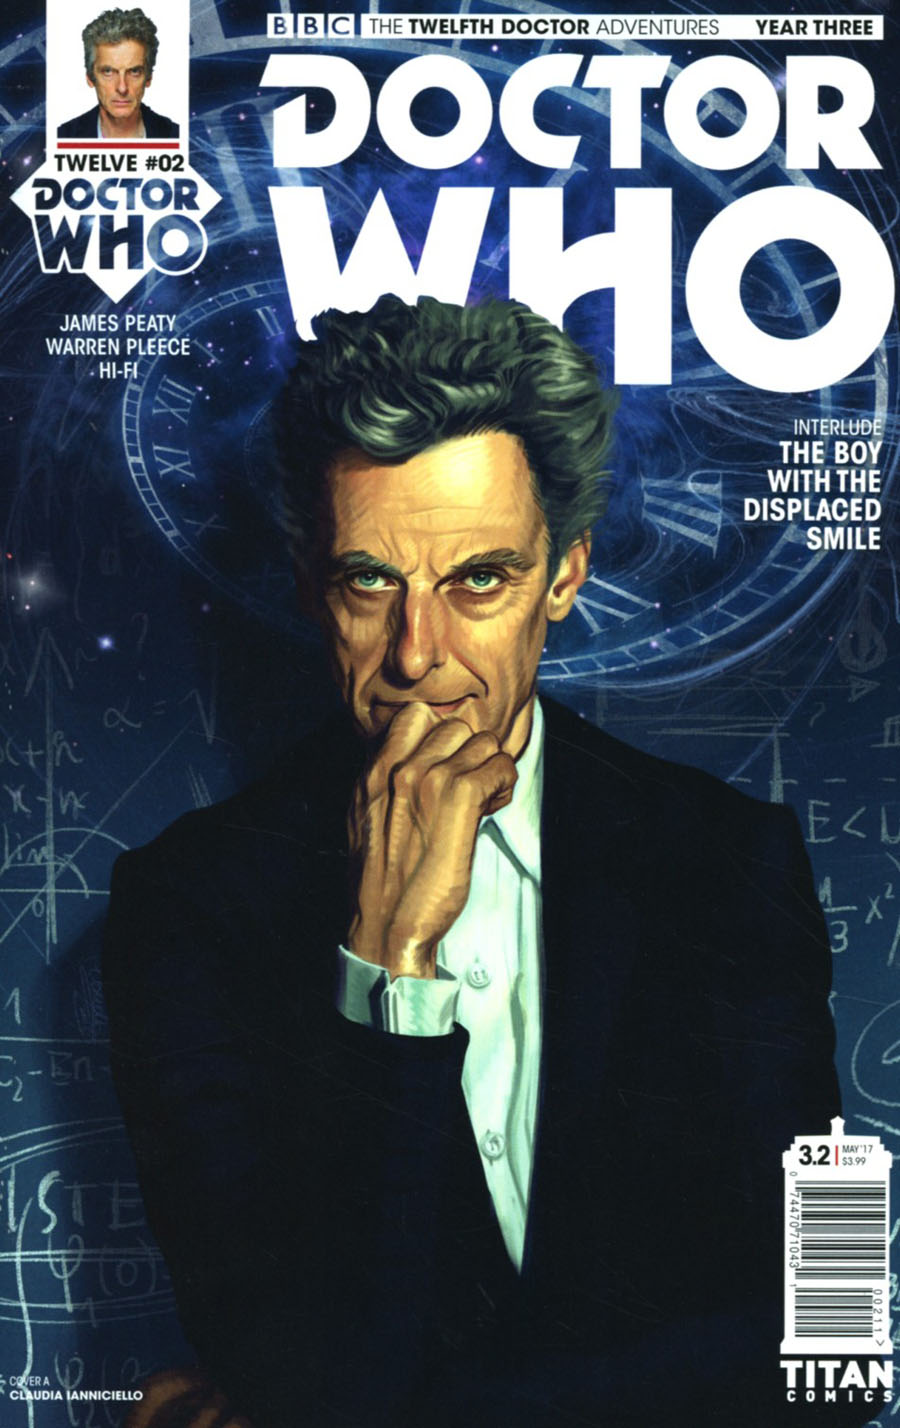 Doctor Who 12th Doctor Year Three #2 Cover A Regular Claudia Ianniciello Cover